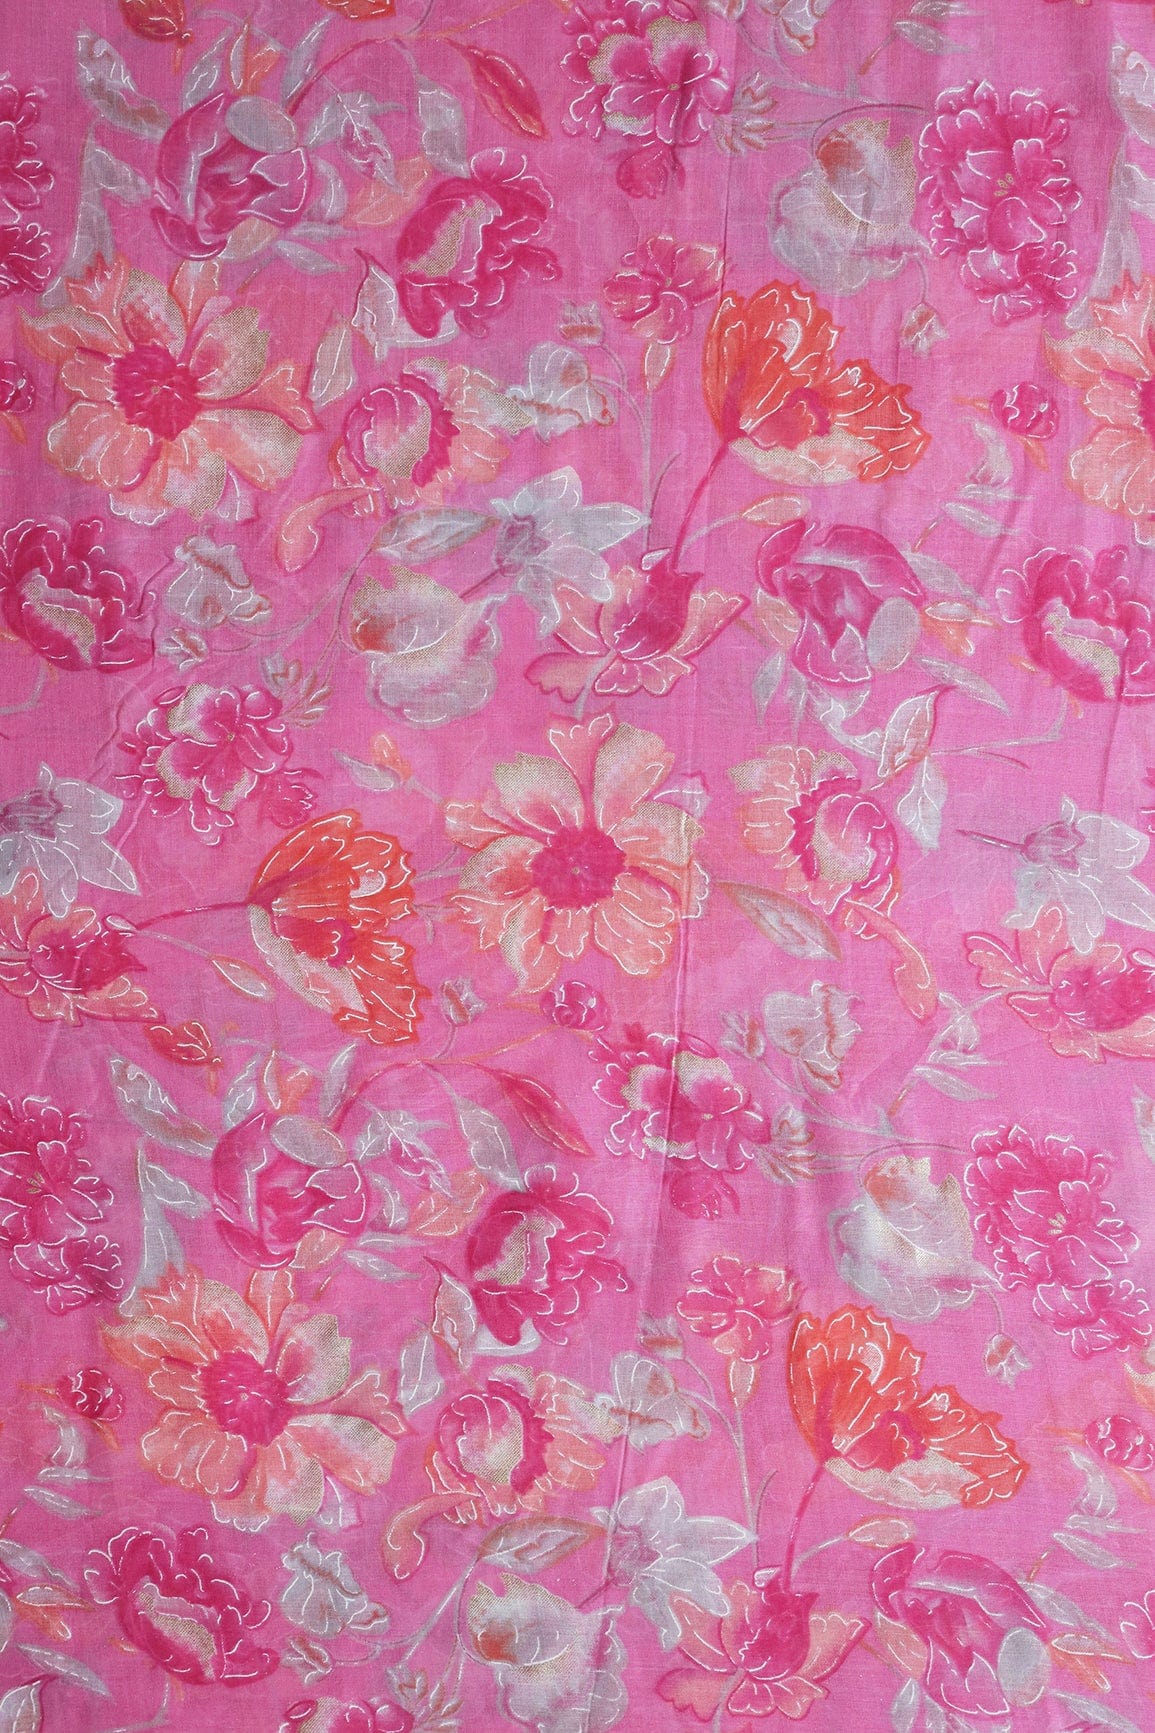 doeraa Prints Ultra Pink And Grey Floral Foil Print On Pure Mul Cotton Fabric